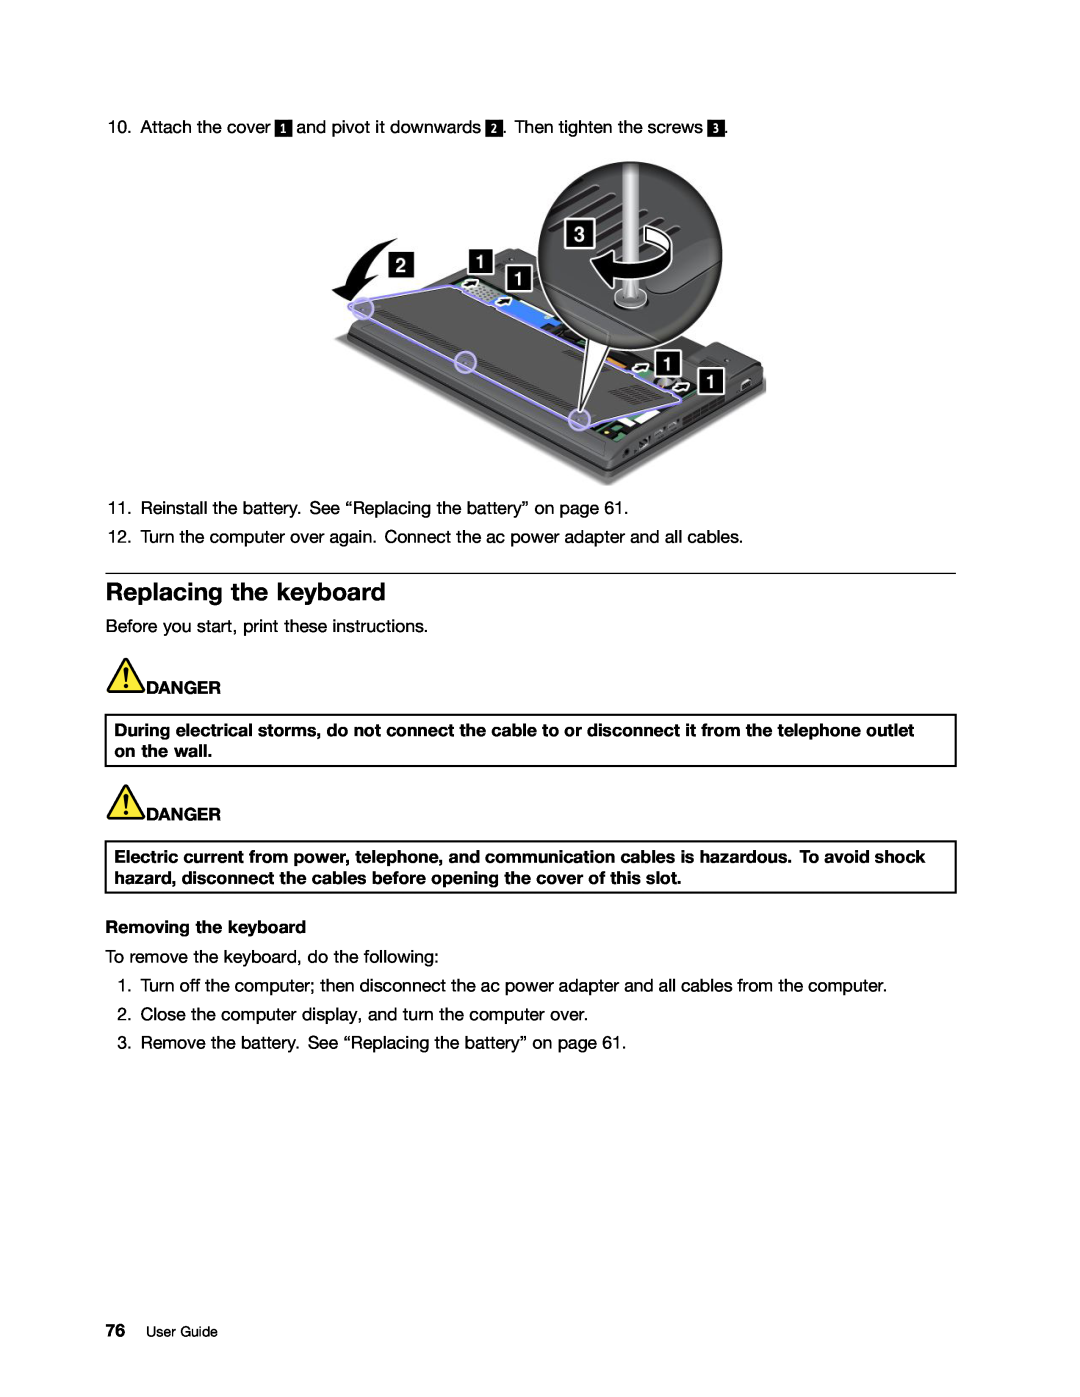 Lenovo X131E manual Replacing the keyboard, Removing the keyboard, Danger, User Guide 